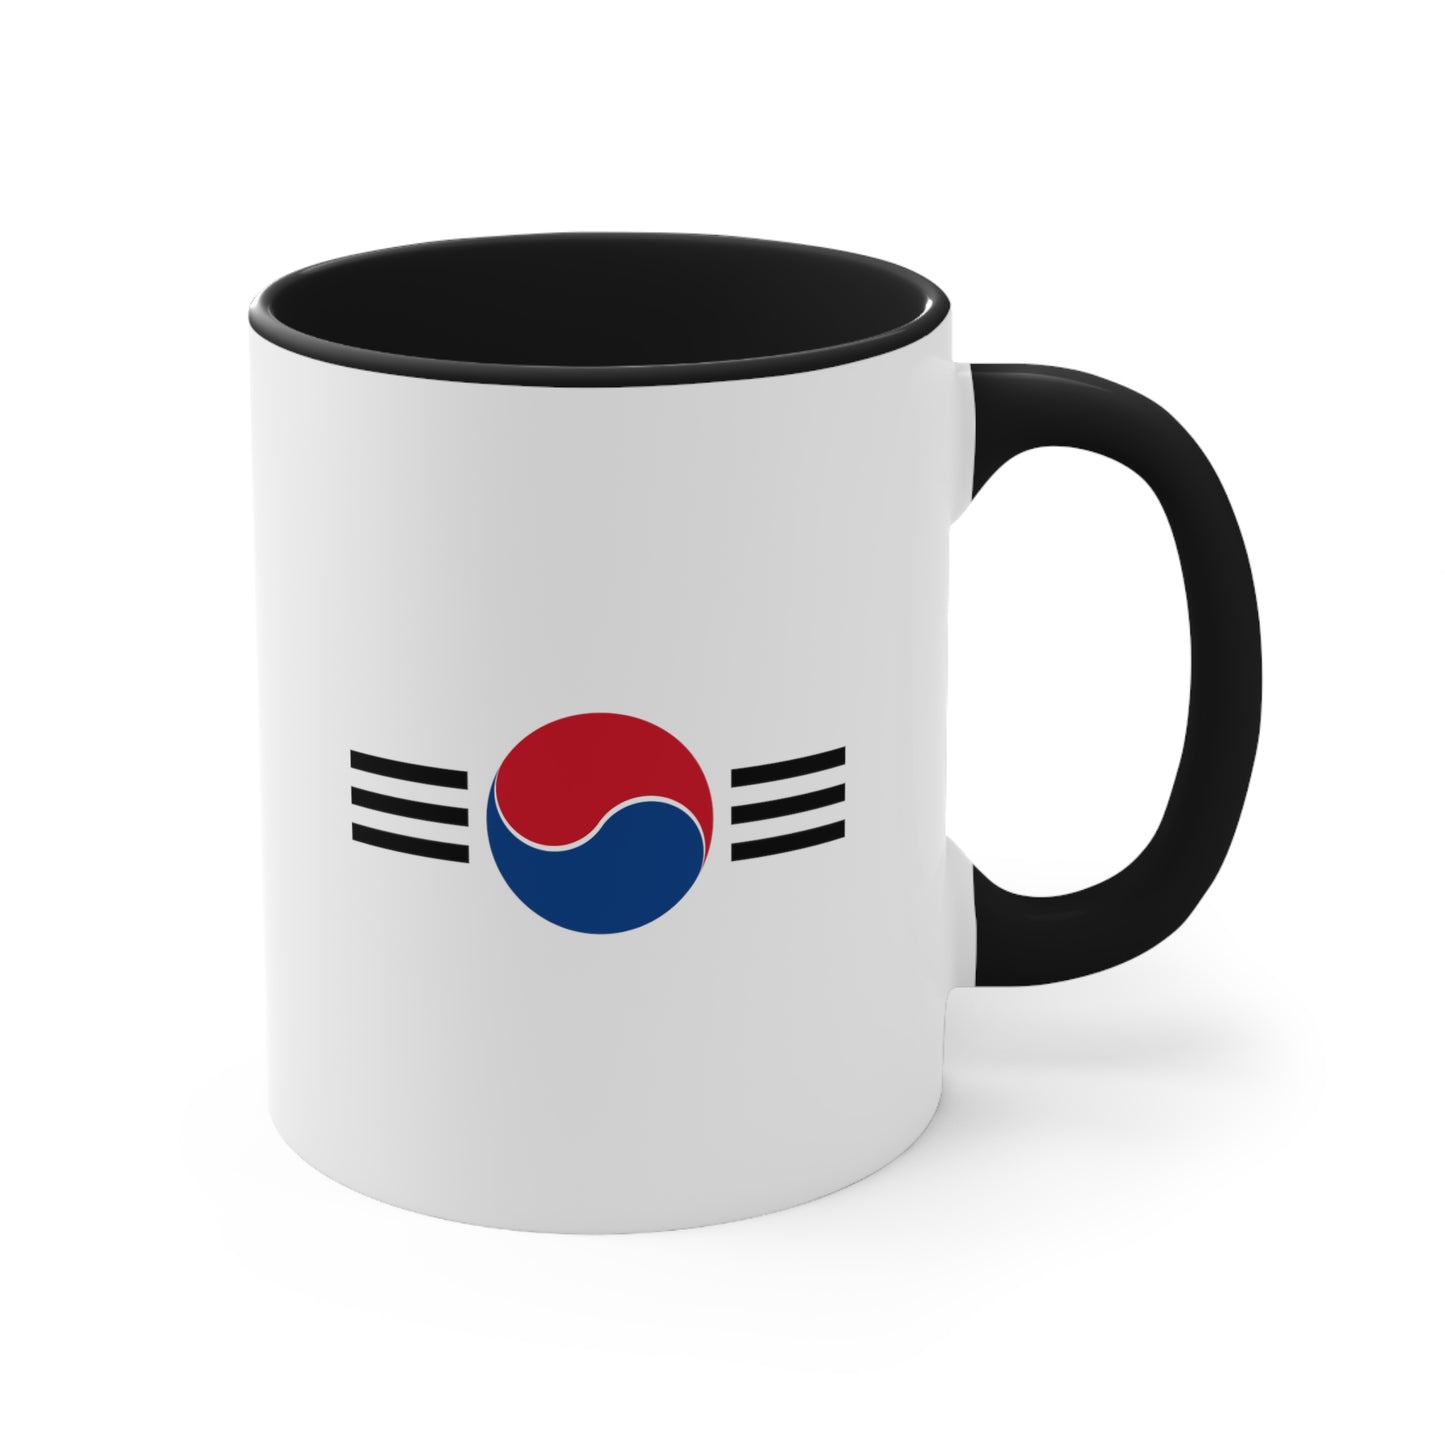 South Korean Air Force Roundel Coffee Mug - Double Sided Black Accent Ceramic 11oz - by TheGlassyLass.com